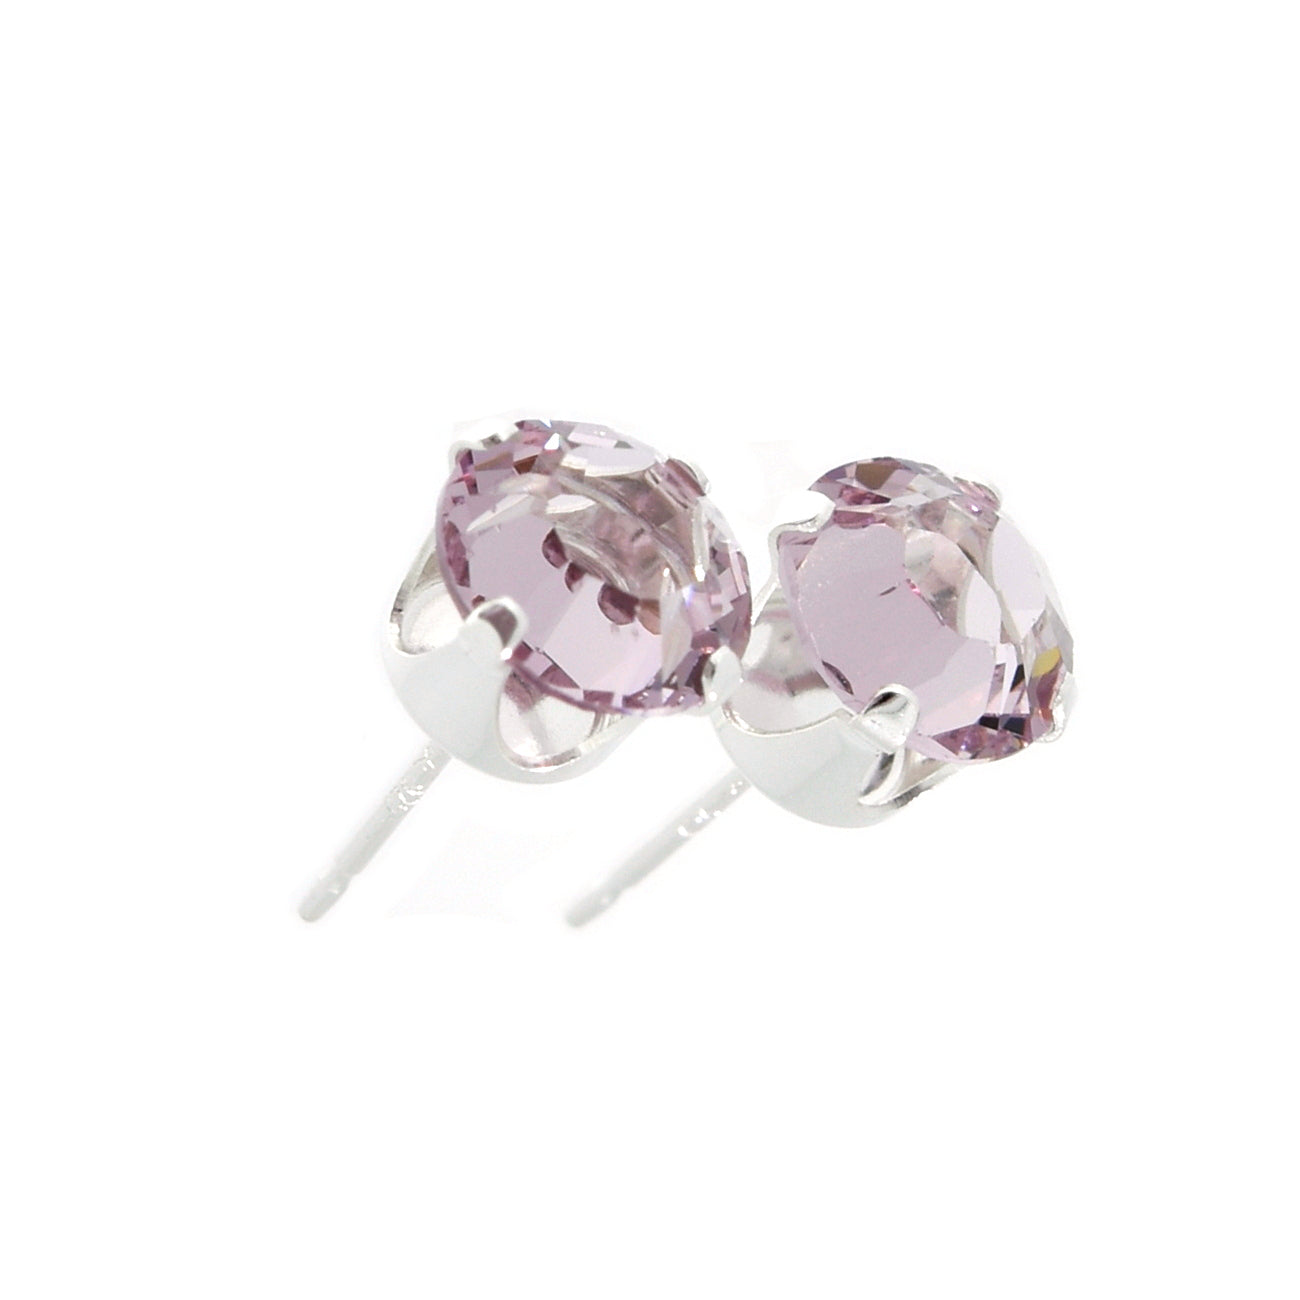 pewterhooter® Women's Classic Collection 925 Sterling silver earrings with sparkling Light Amethyst channel crystals, packaged in a gift box for any occasion.